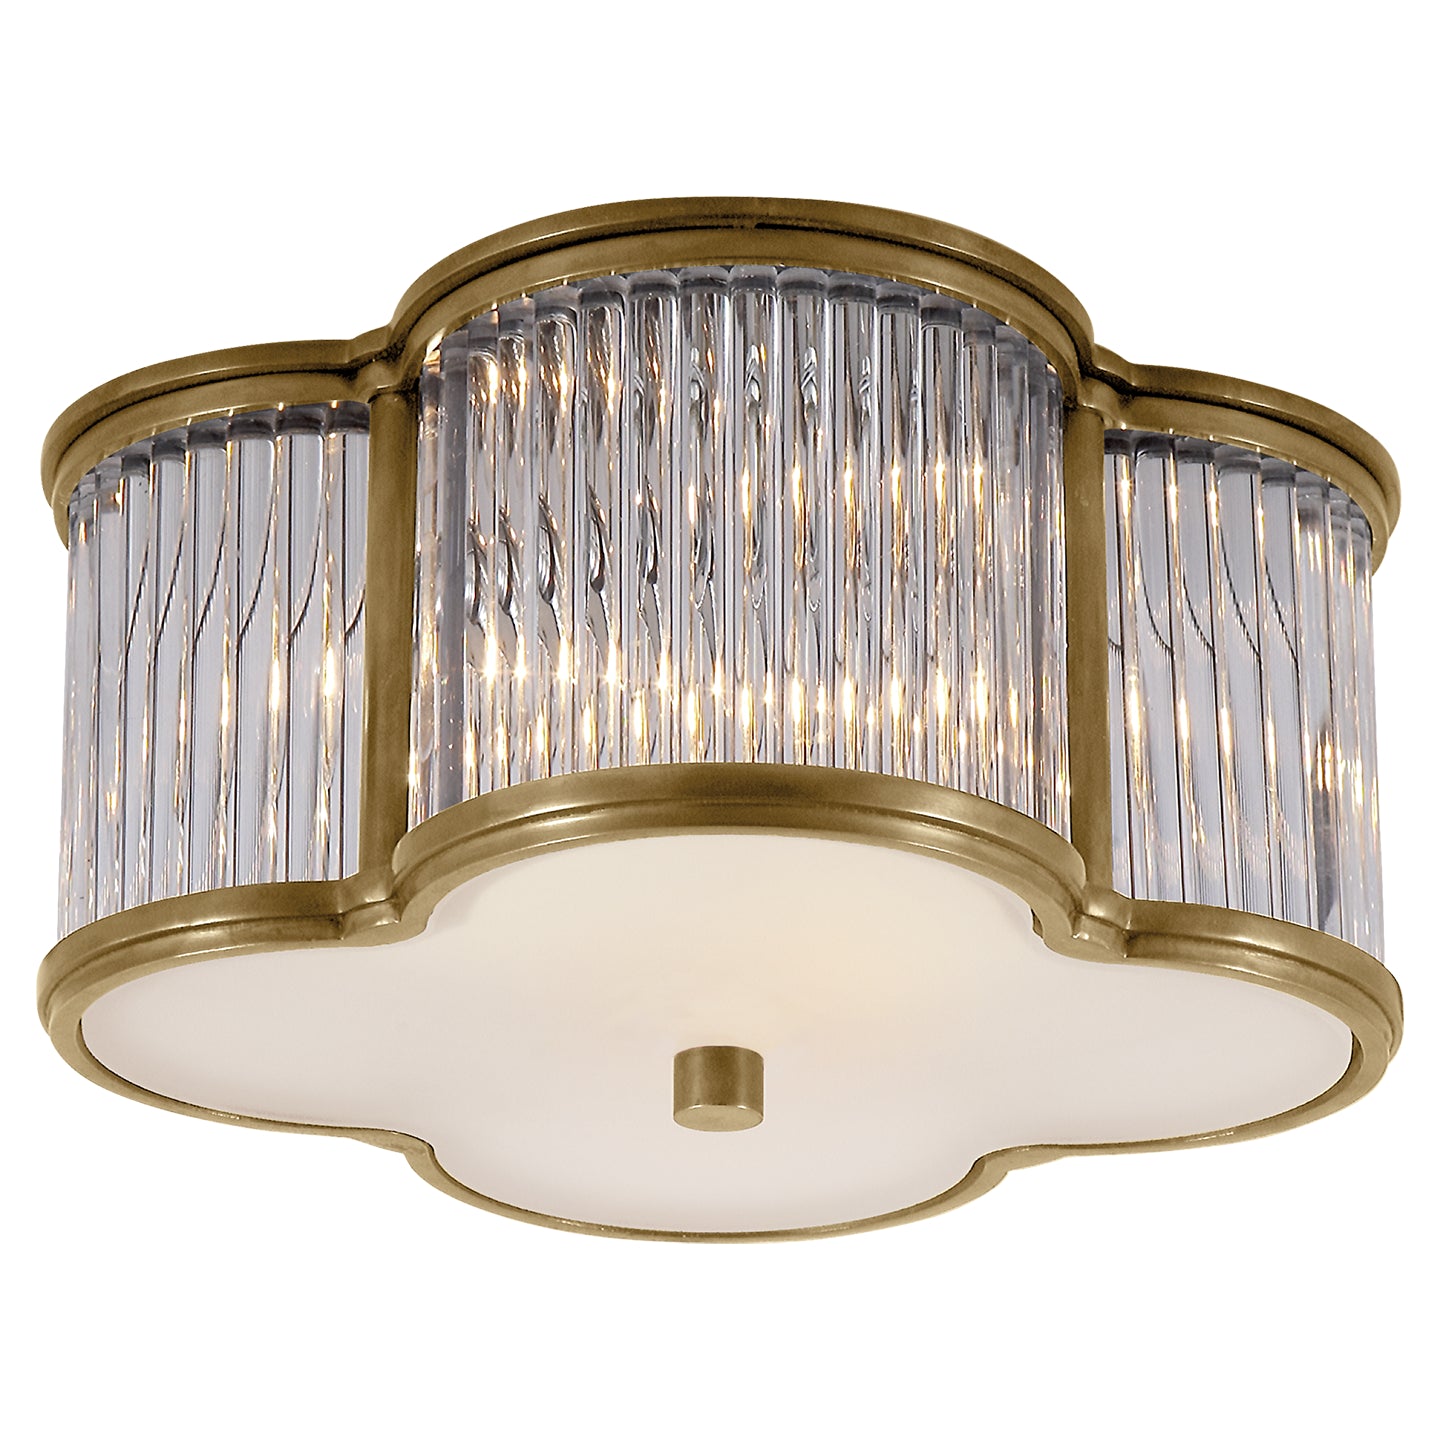 Visual Comfort Signature Canada - Two Light Flush Mount - Basil - Natural Brass with Clear Glass- Union Lighting Luminaires Decor